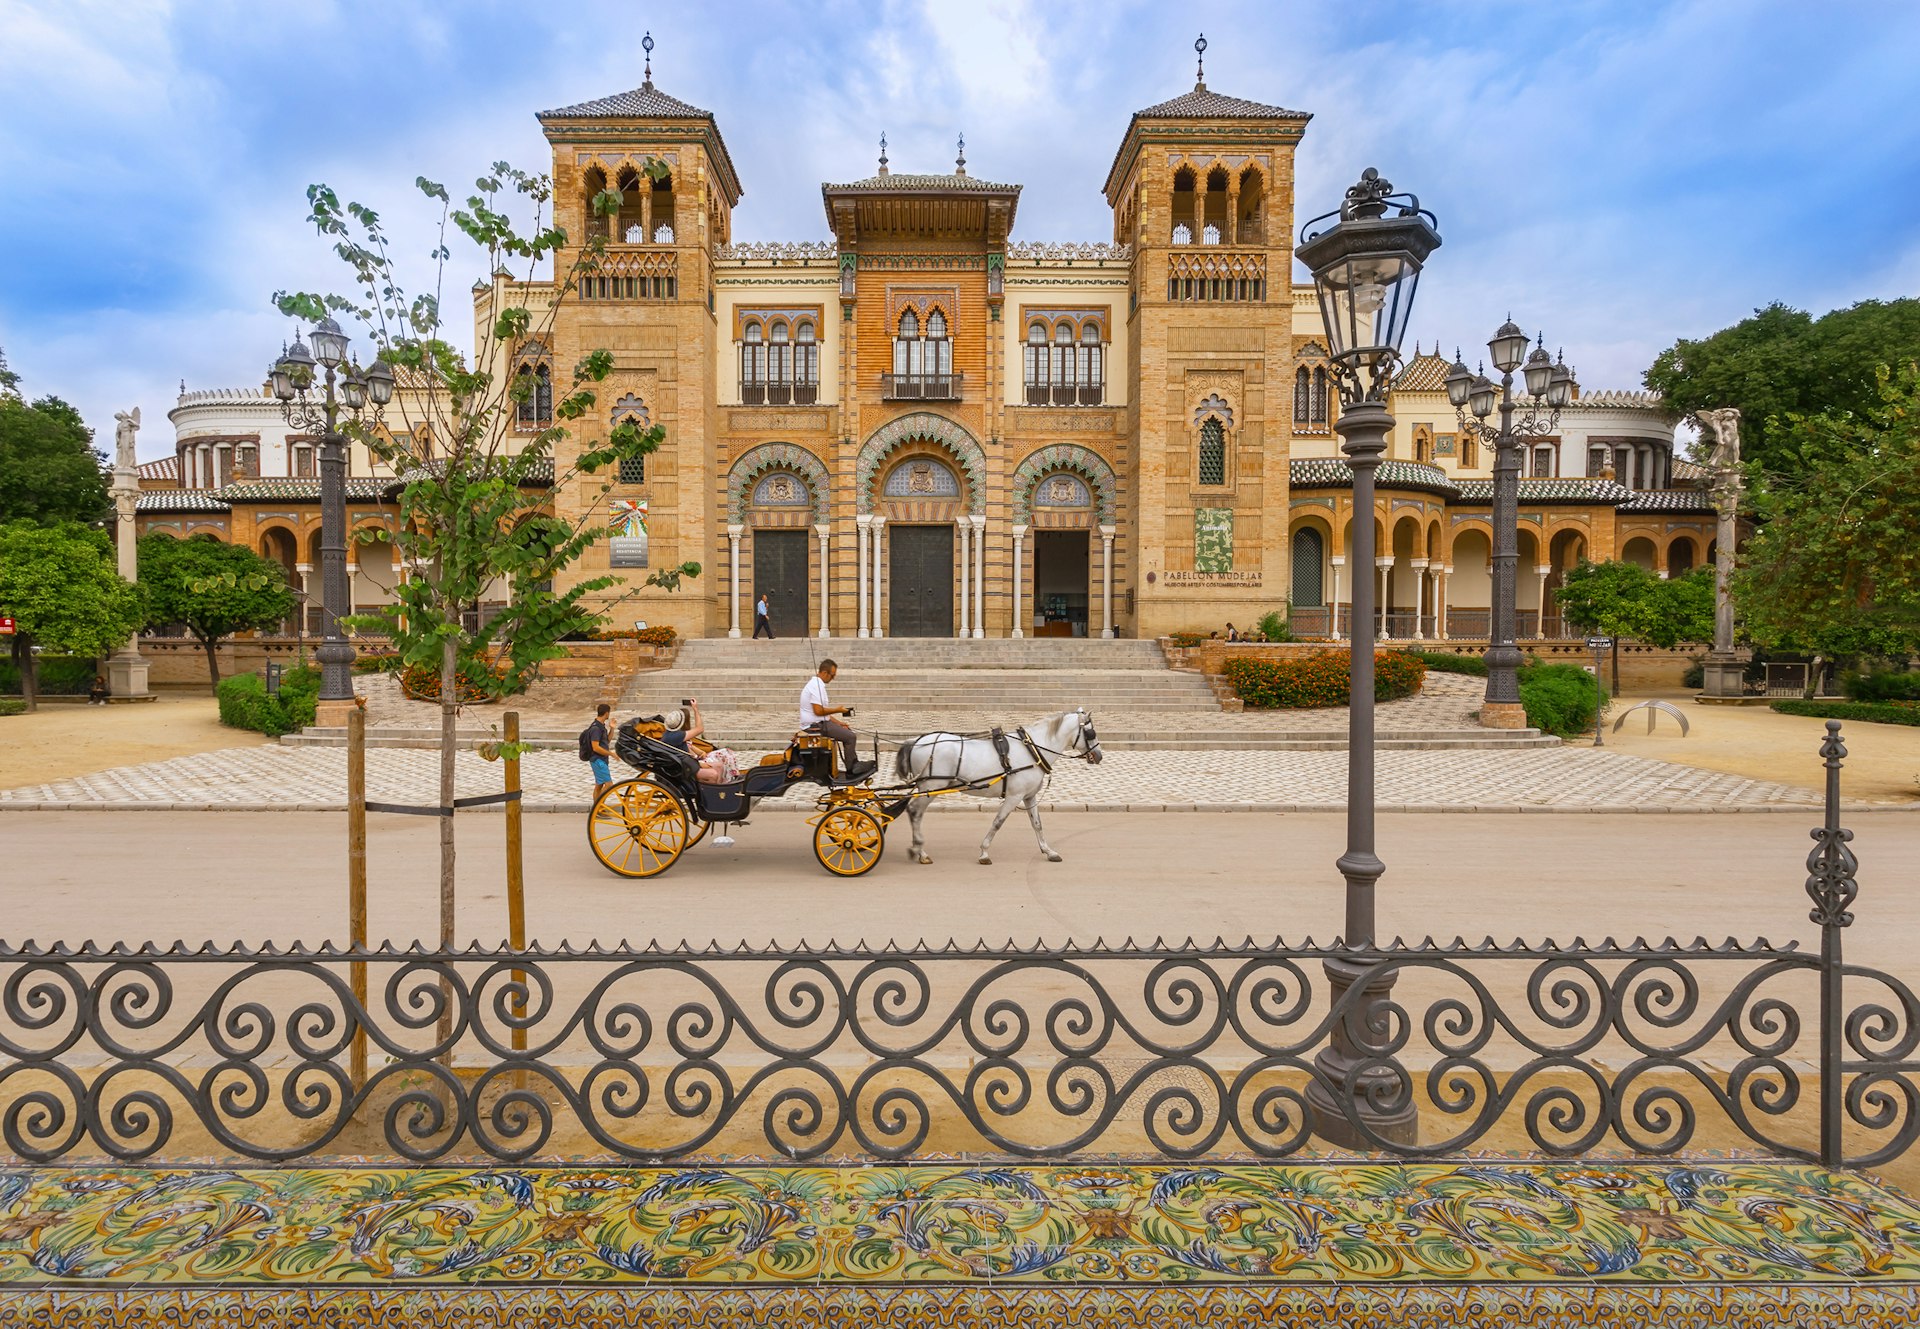 A horse-drawn carriage in front of a building in Seville. 